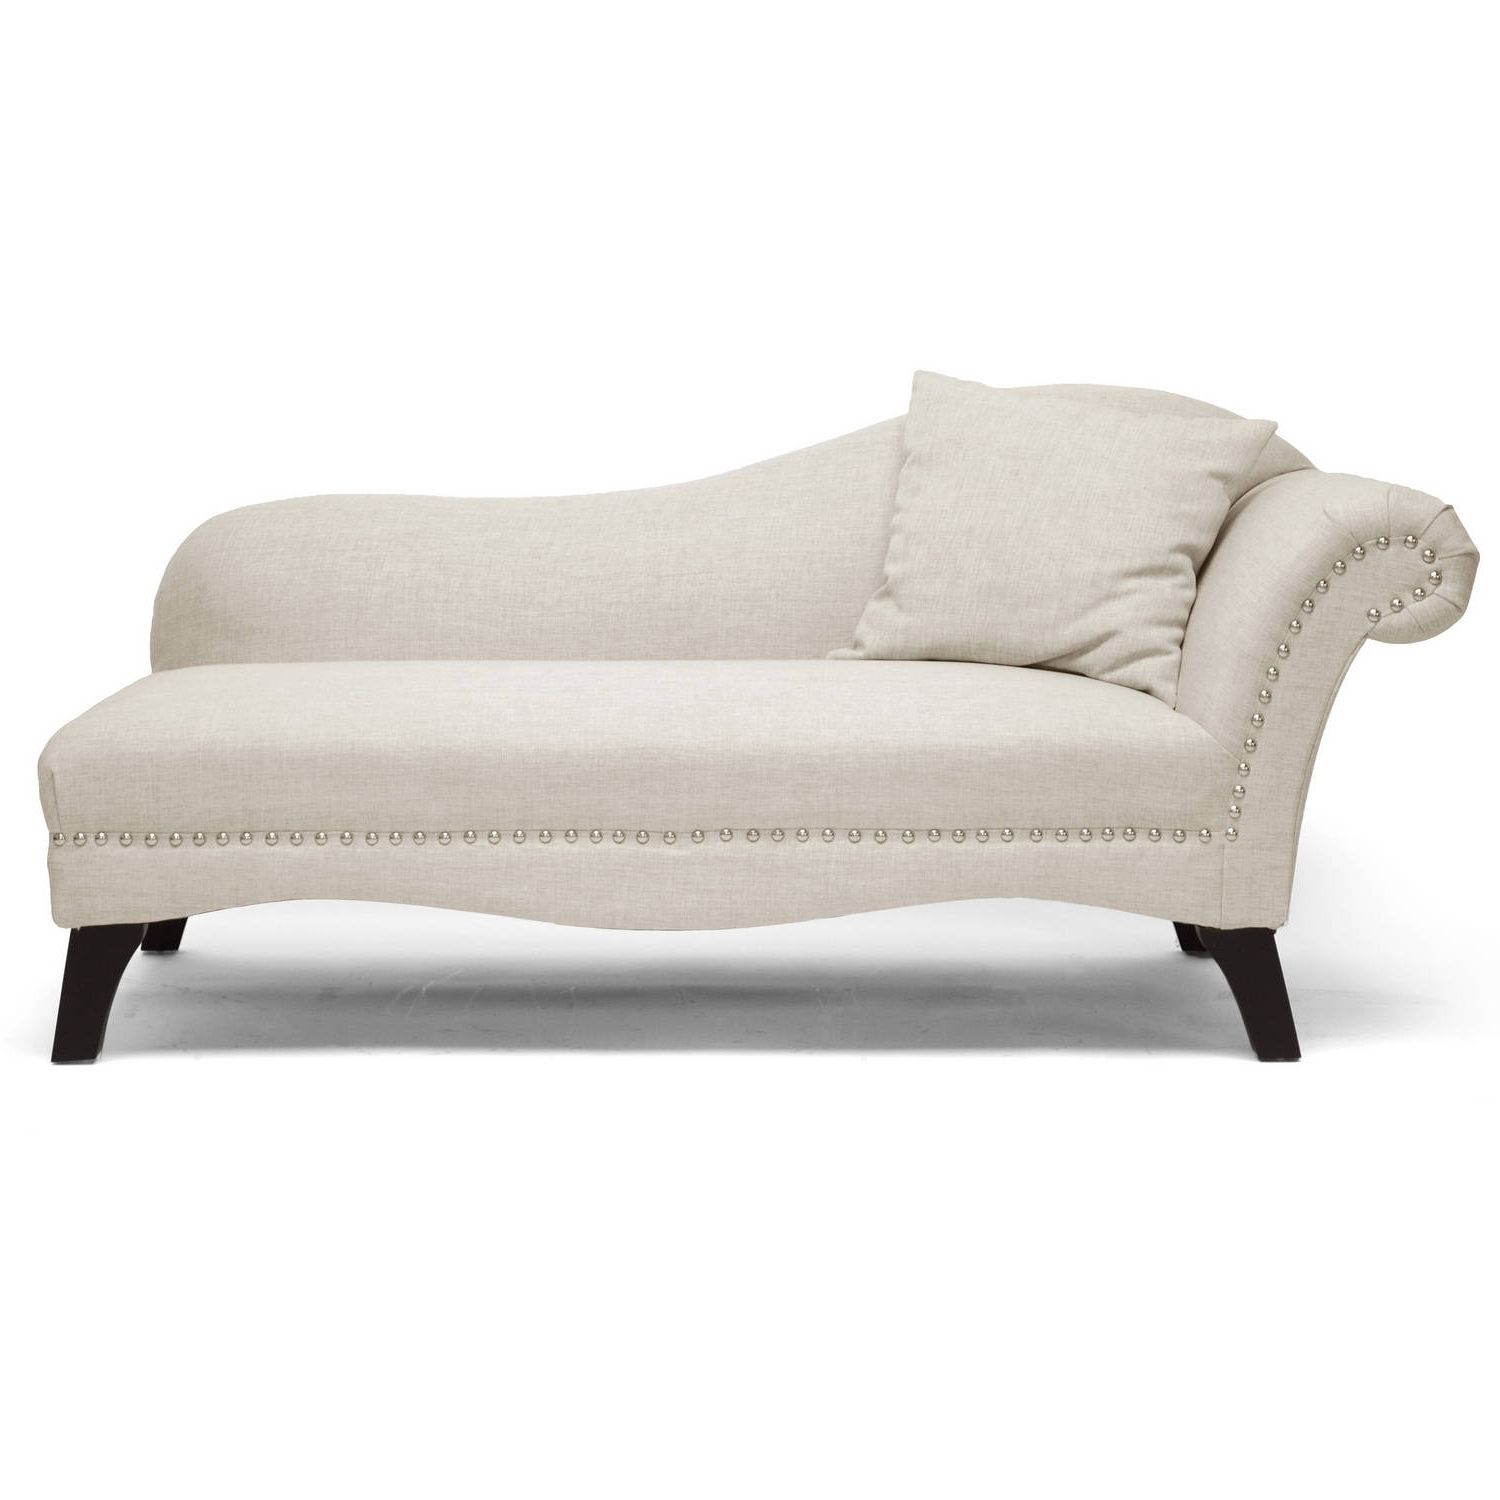 Chaise Lounges – Walmart For Well Known Chaise Lounge Chairs Without Arms (View 15 of 15)